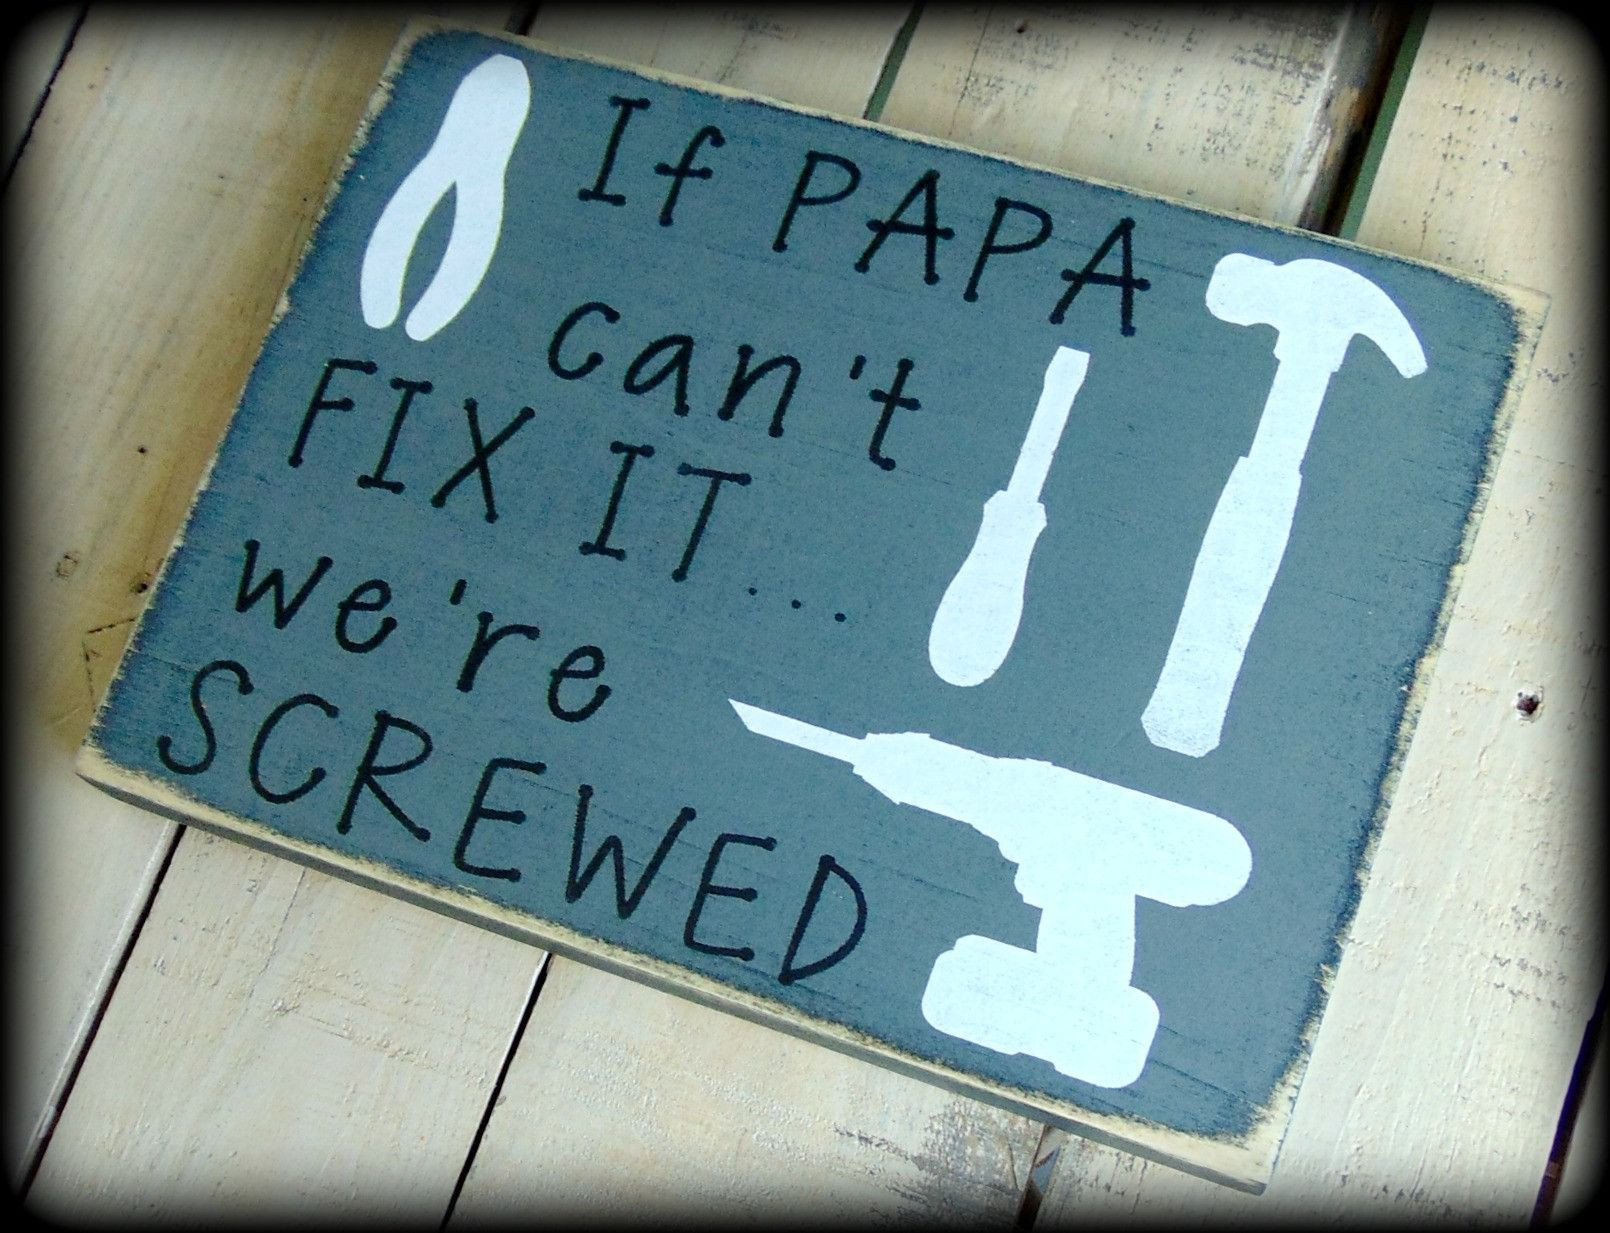 DIY Gifts For Your Dad
 If Papa Can t Fix It We re Screwed Rustic Wooden Sign